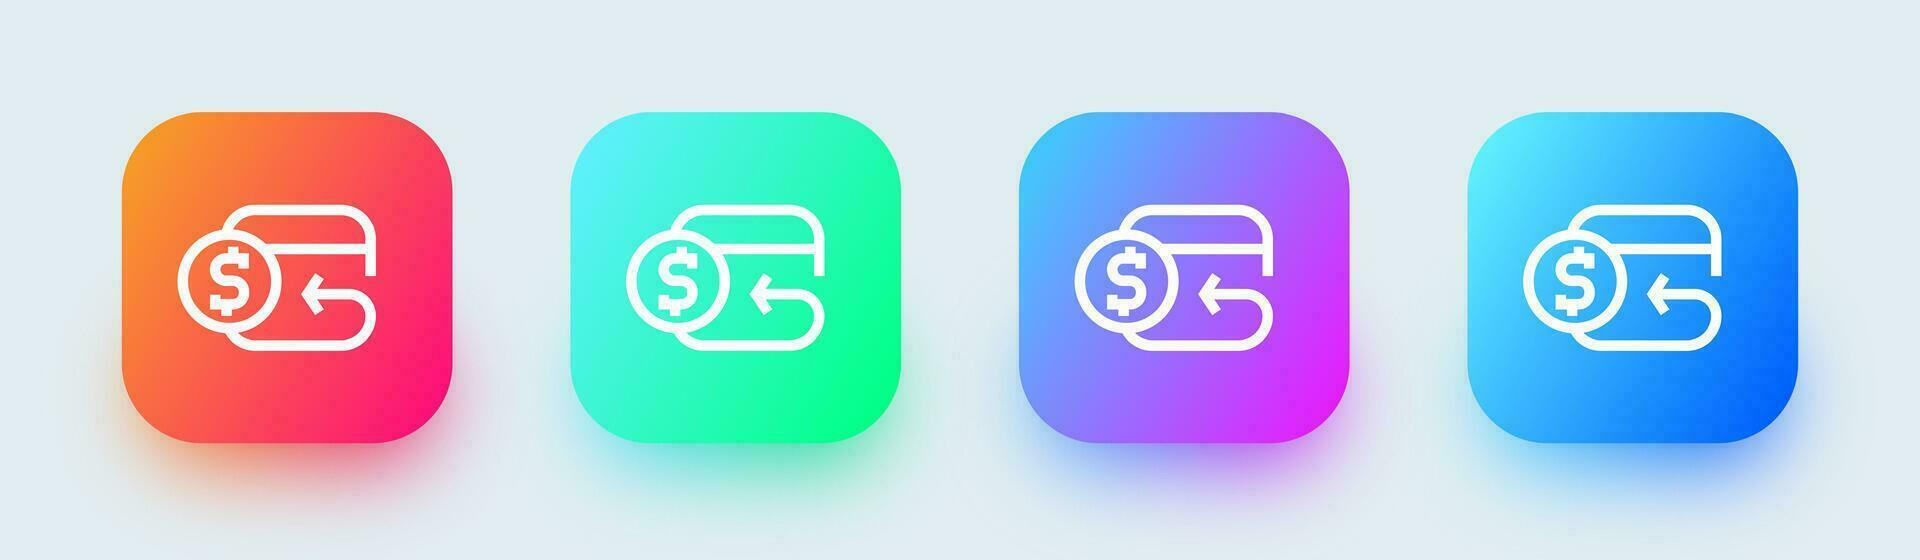 Cashback line icon in square gradient colors. Refund signs vector illustration.